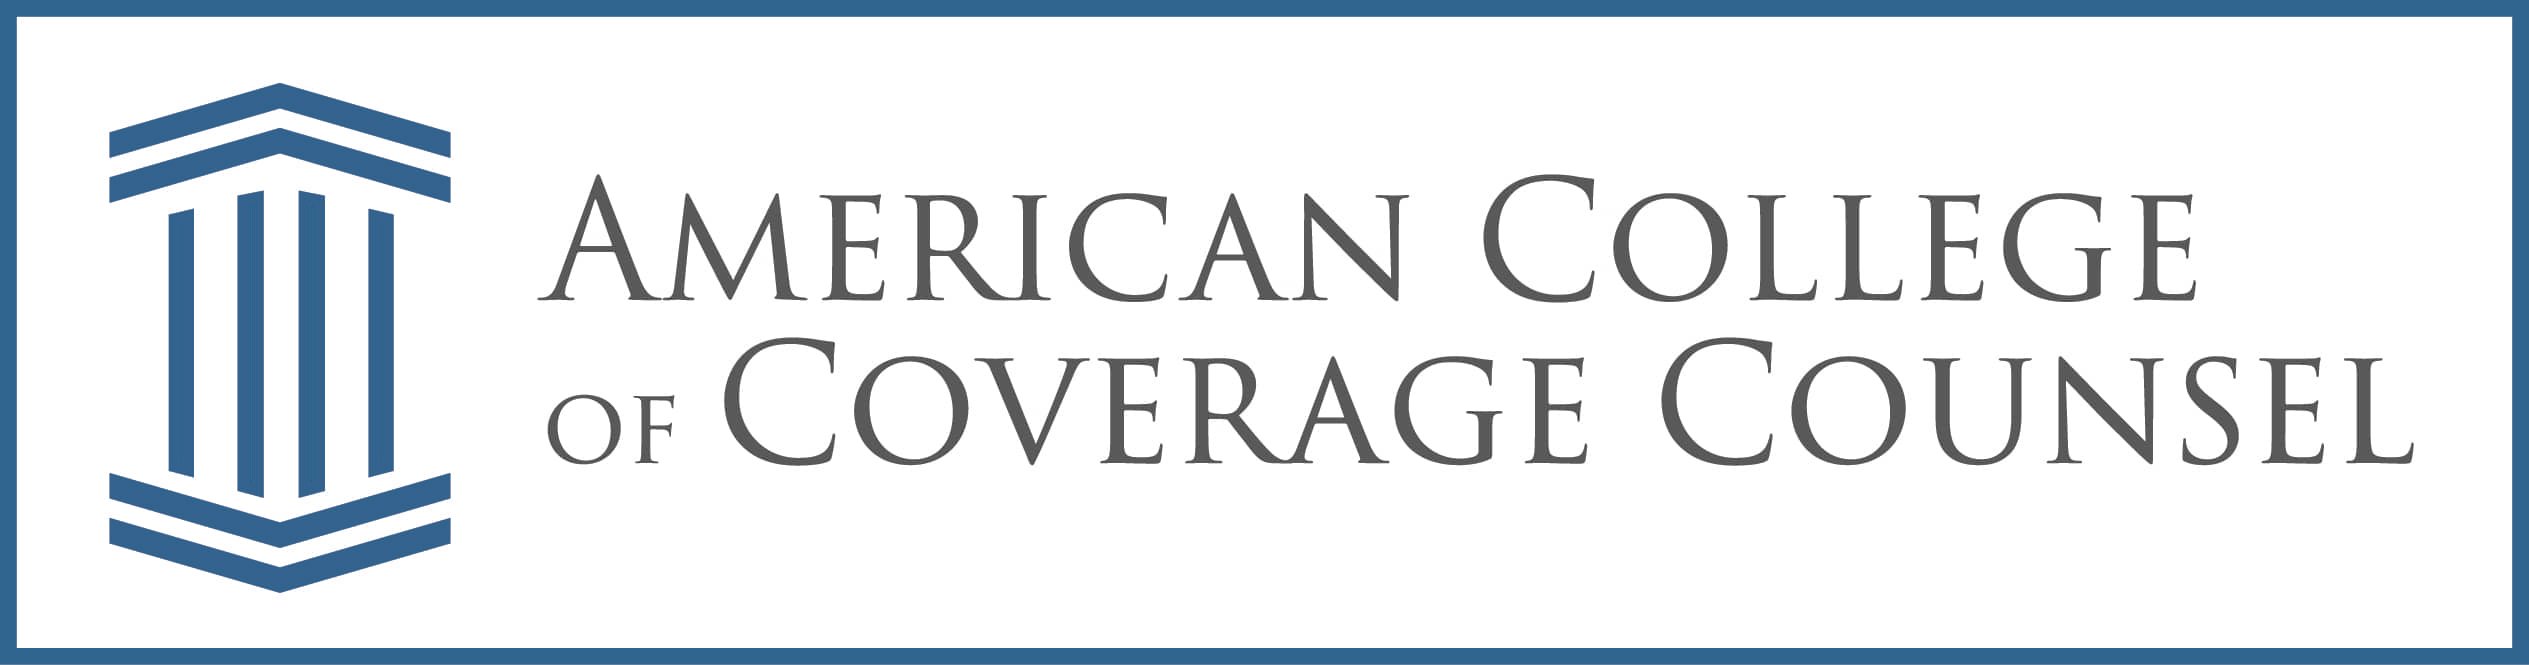 American College Of Coverage Counsel